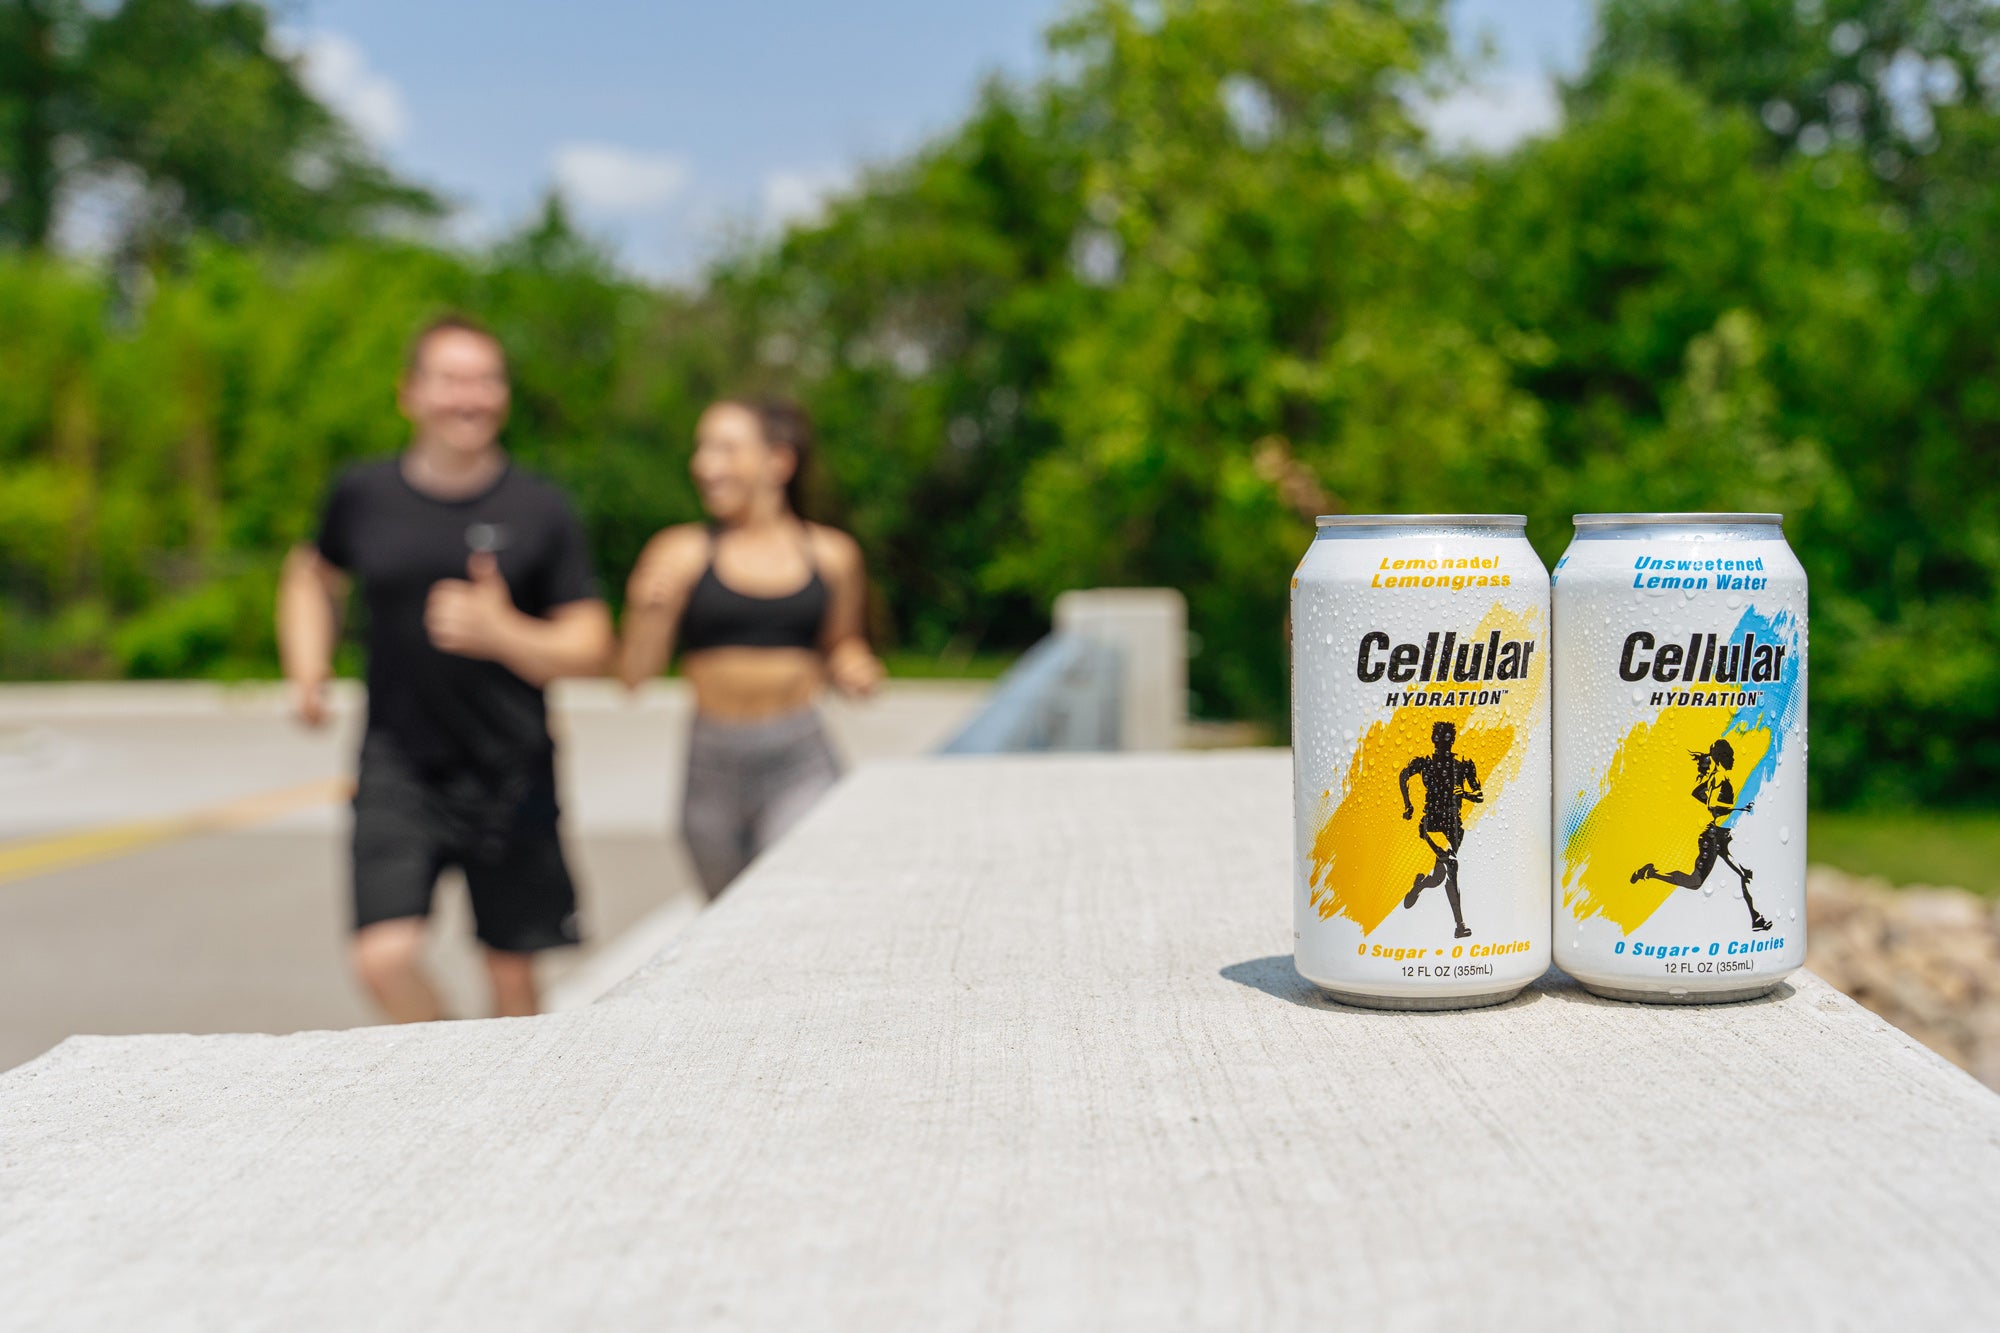 Two cans of Cellular Hydration in the foreground with man and woman jogging in background